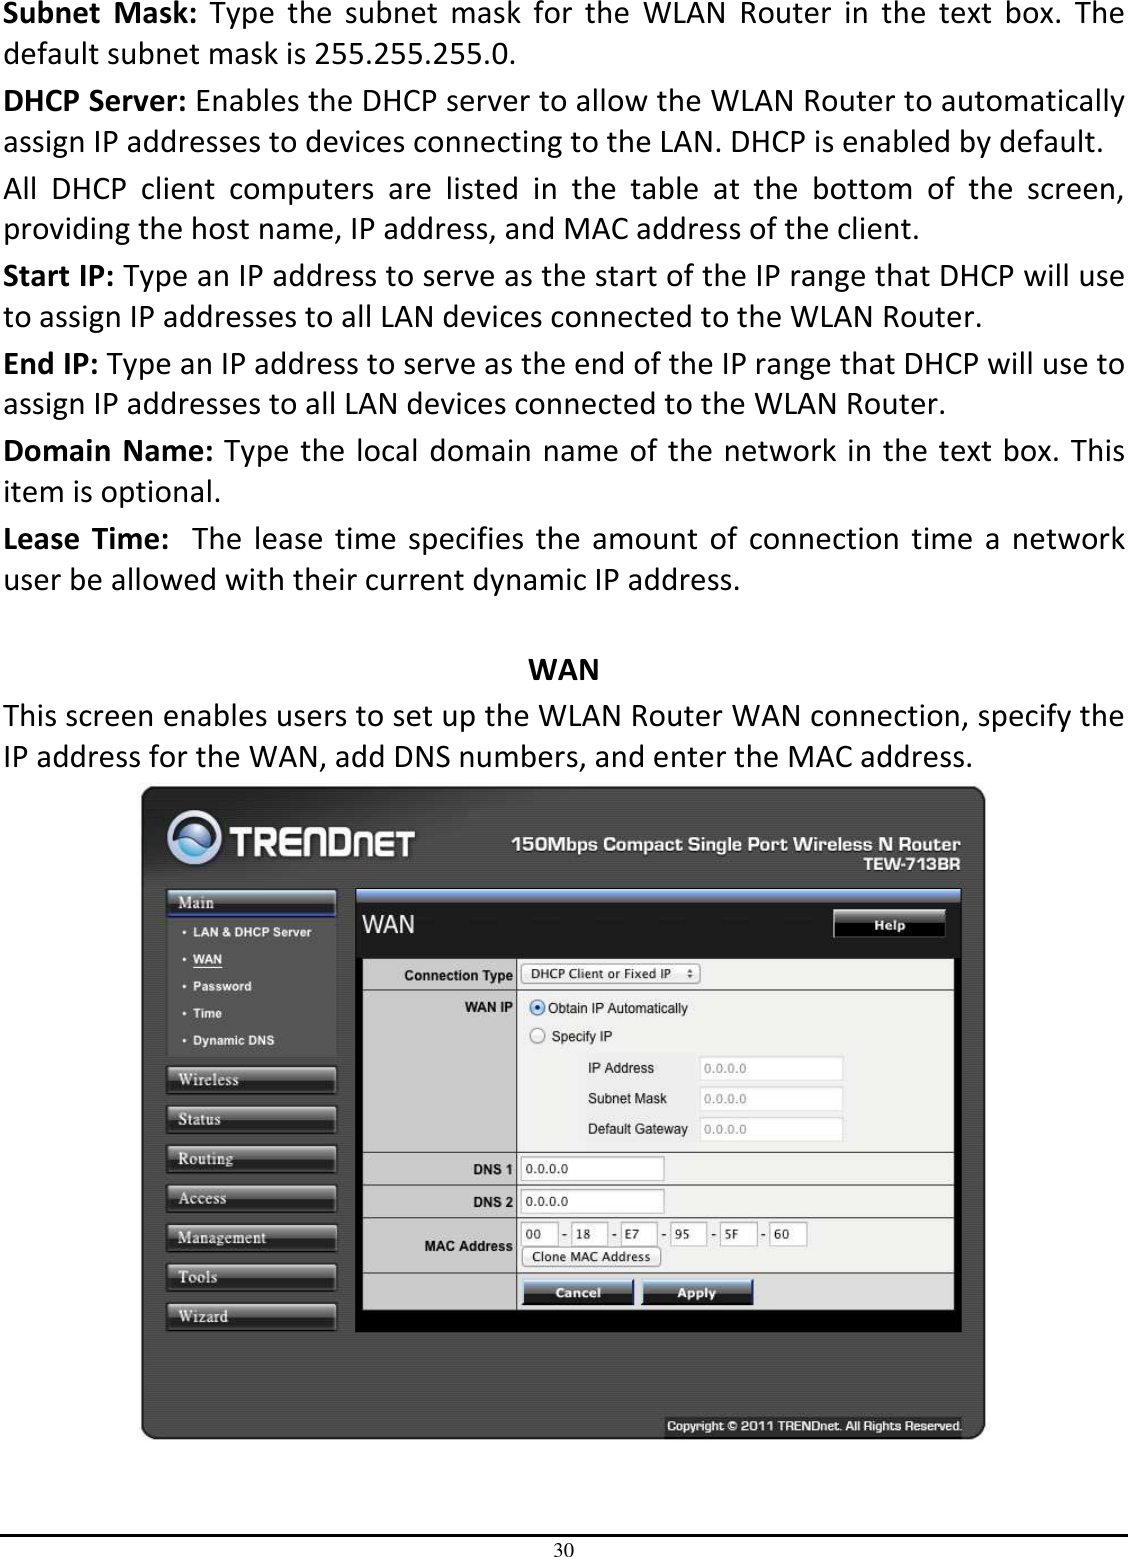 30 Subnet  Mask:  Type  the  subnet  mask  for  the  WLAN  Router  in  the  text  box.  The default subnet mask is 255.255.255.0. DHCP Server: Enables the DHCP server to allow the WLAN Router to automatically assign IP addresses to devices connecting to the LAN. DHCP is enabled by default. All  DHCP  client  computers  are  listed  in  the  table  at  the  bottom  of  the  screen, providing the host name, IP address, and MAC address of the client. Start IP: Type an IP address to serve as the start of the IP range that DHCP will use to assign IP addresses to all LAN devices connected to the WLAN Router. End IP: Type an IP address to serve as the end of the IP range that DHCP will use to assign IP addresses to all LAN devices connected to the WLAN Router. Domain Name: Type the local domain name of the network in the text box. This item is optional. Lease  Time:  The lease time specifies the amount of connection time a network user be allowed with their current dynamic IP address.  WAN This screen enables users to set up the WLAN Router WAN connection, specify the IP address for the WAN, add DNS numbers, and enter the MAC address.  